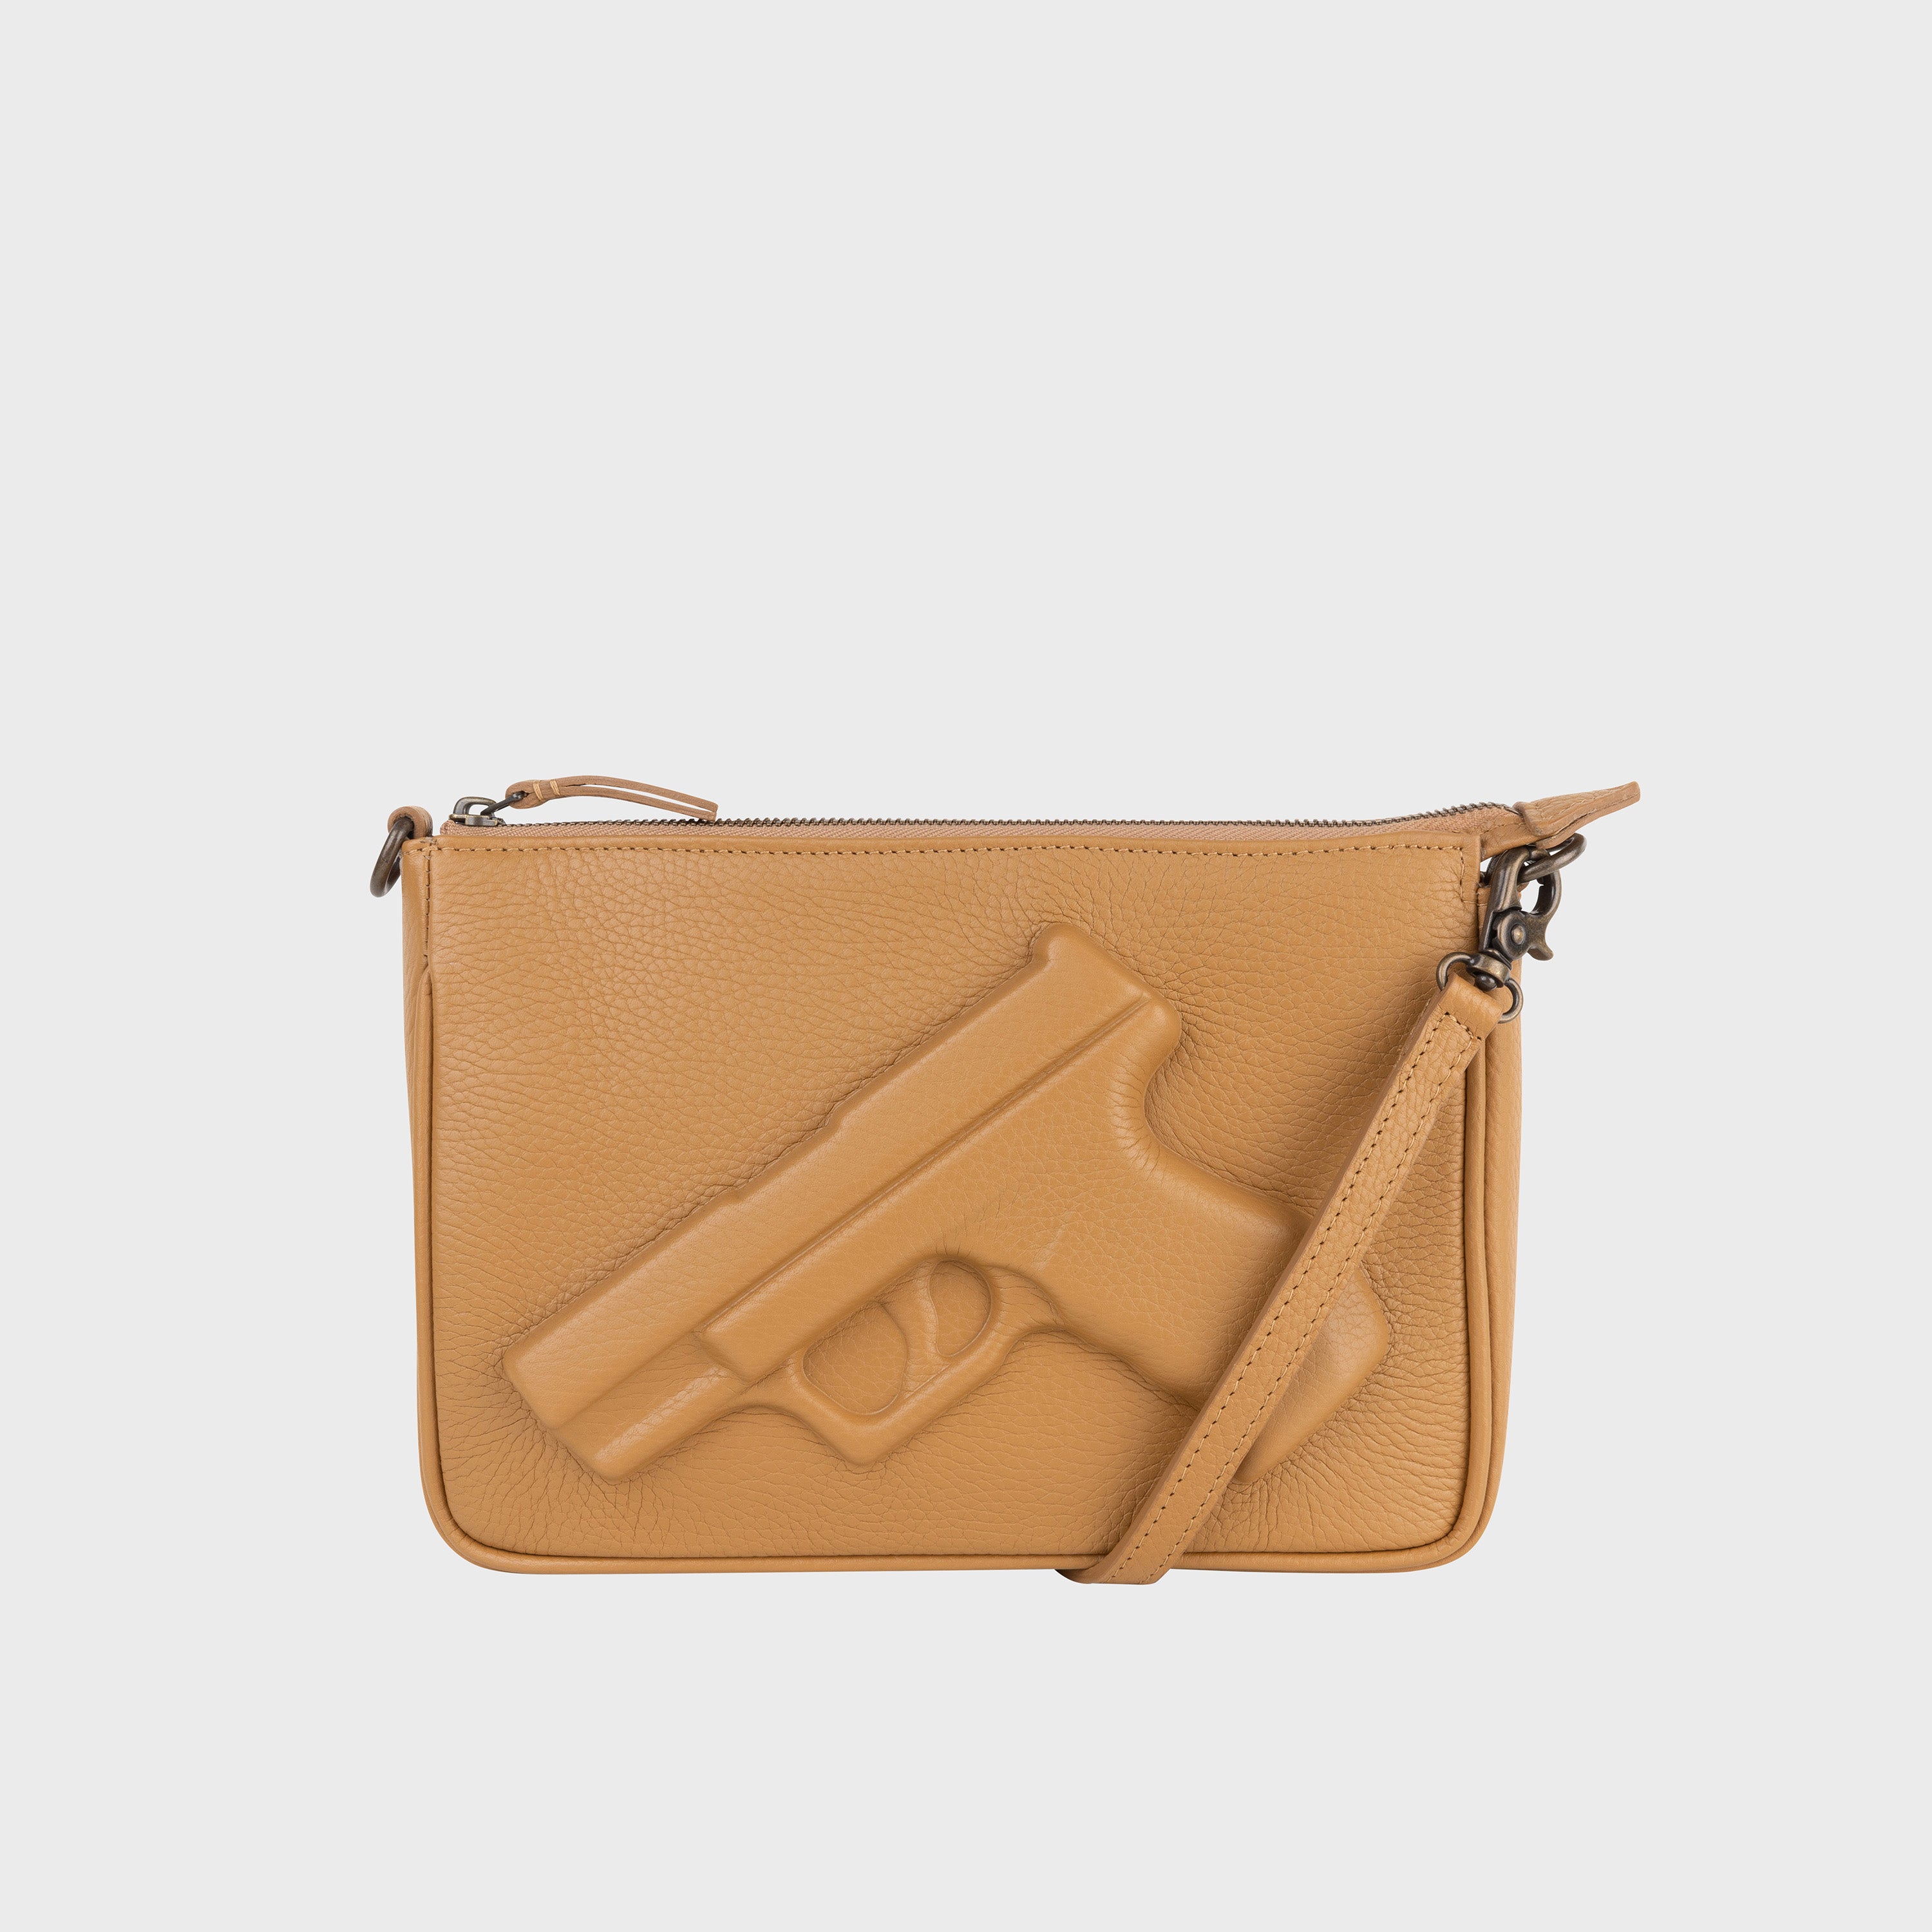 Buy Wallet Pistol - Order wallet Pistol - Wallet pistol for sale